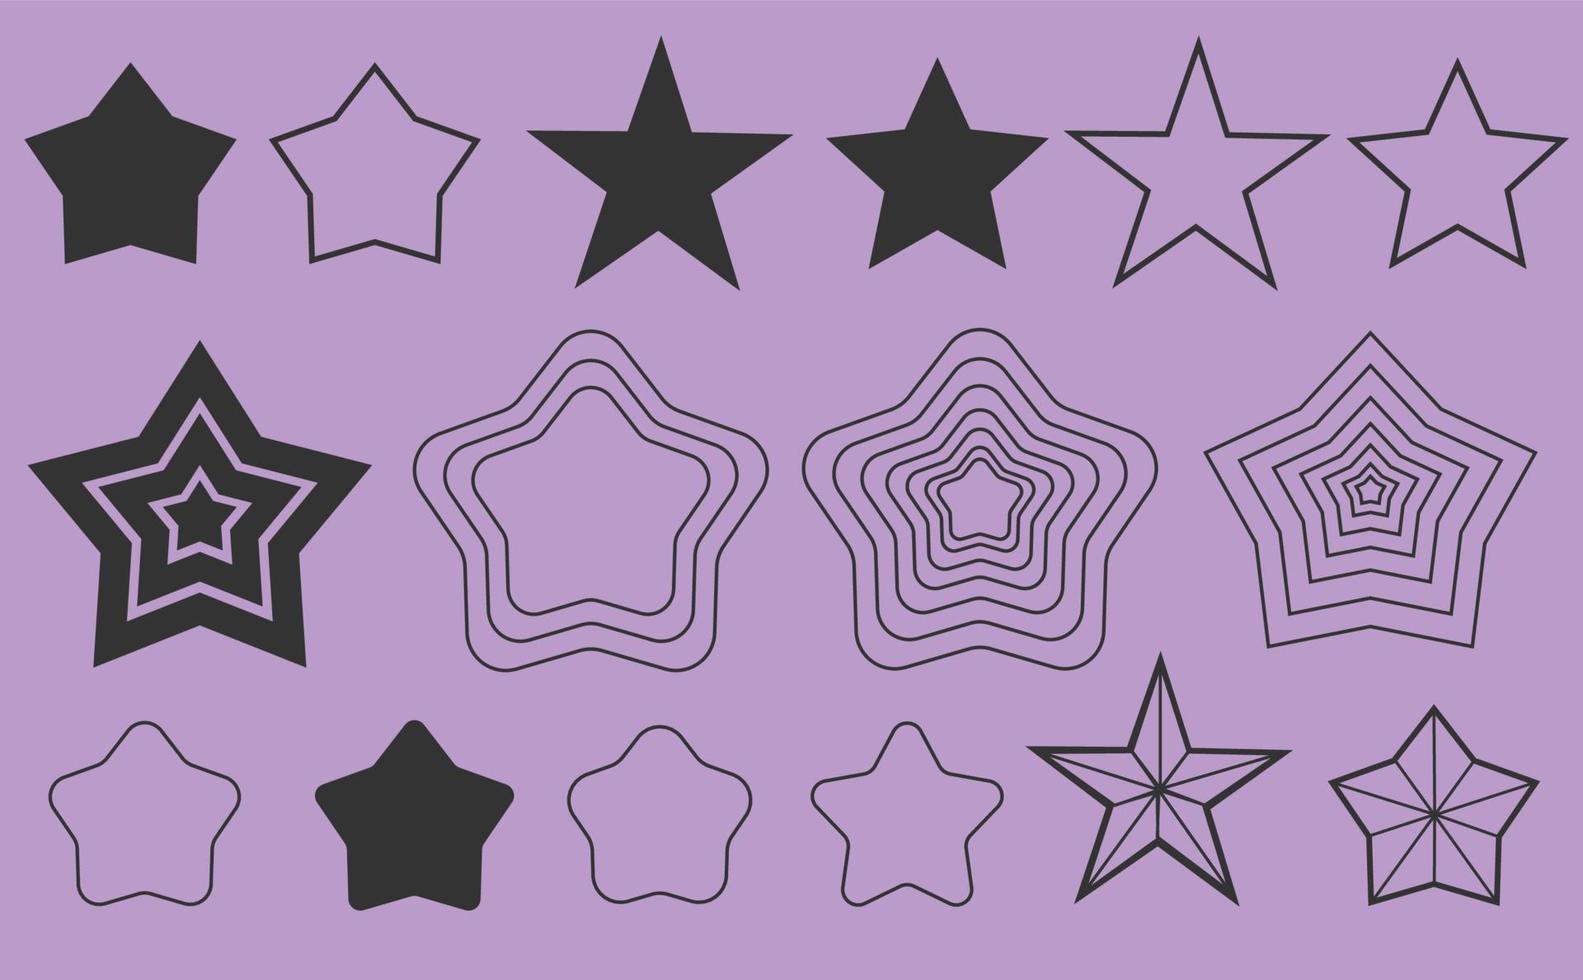 All those kind of stars rounded looping inside black line pattern background repeat monochorome vector